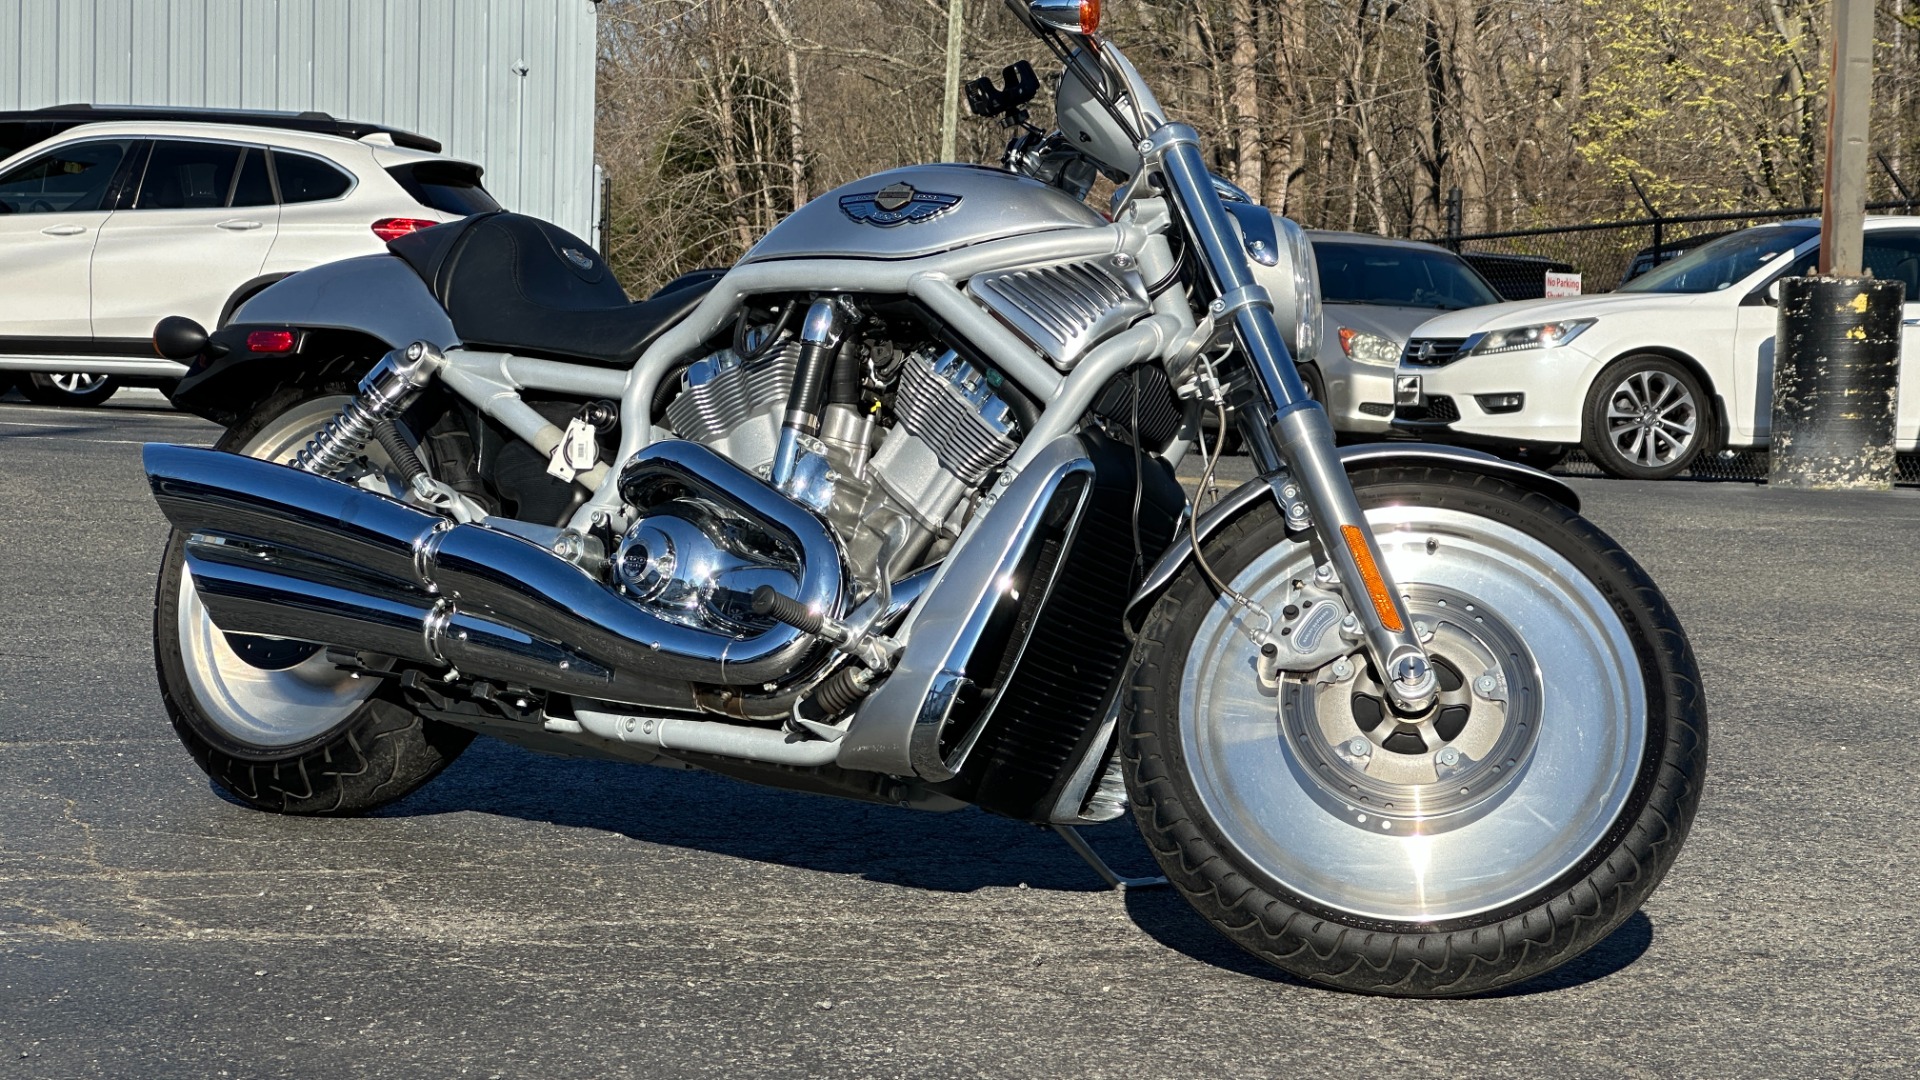 Used 2003 Harley Davidson V Rod ANNIVERSARY EDITION / 1130CC ENGINE / BREMBO BRAKES / VORTEX AIR SCOOPS for sale $7,995 at Formula Imports in Charlotte NC 28227 60